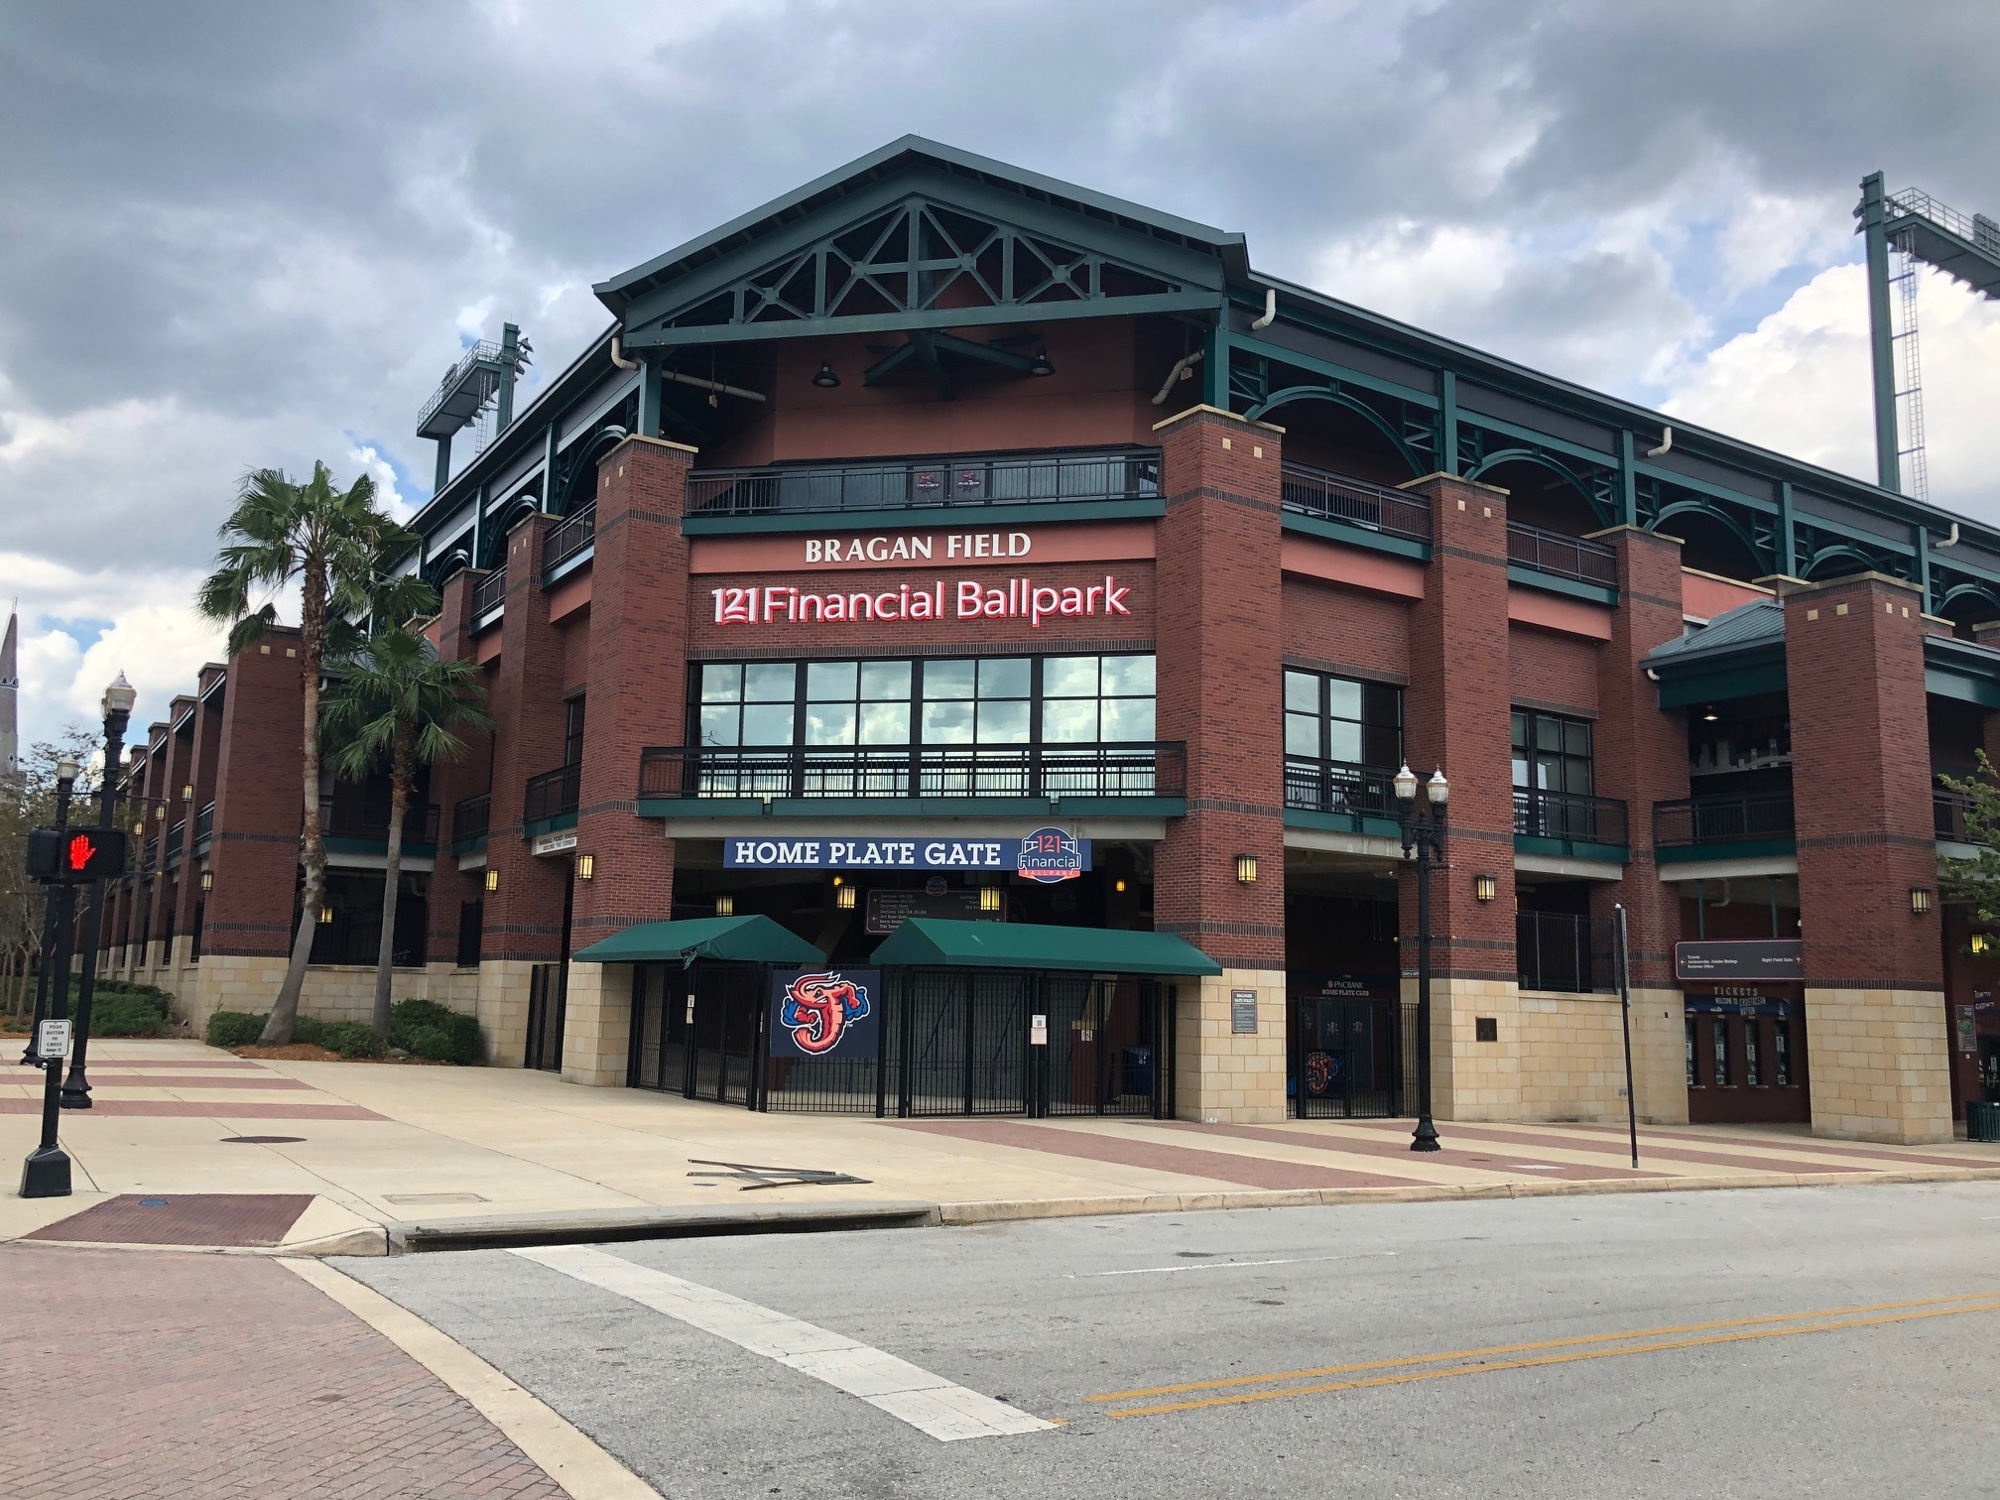 In 2020, 121 Financial Credit Union entered into an agreement with the Jacksonville Jumbo Shrimp for the naming rights to 121 Financial Ballpark in the Downtown Sports Complex.